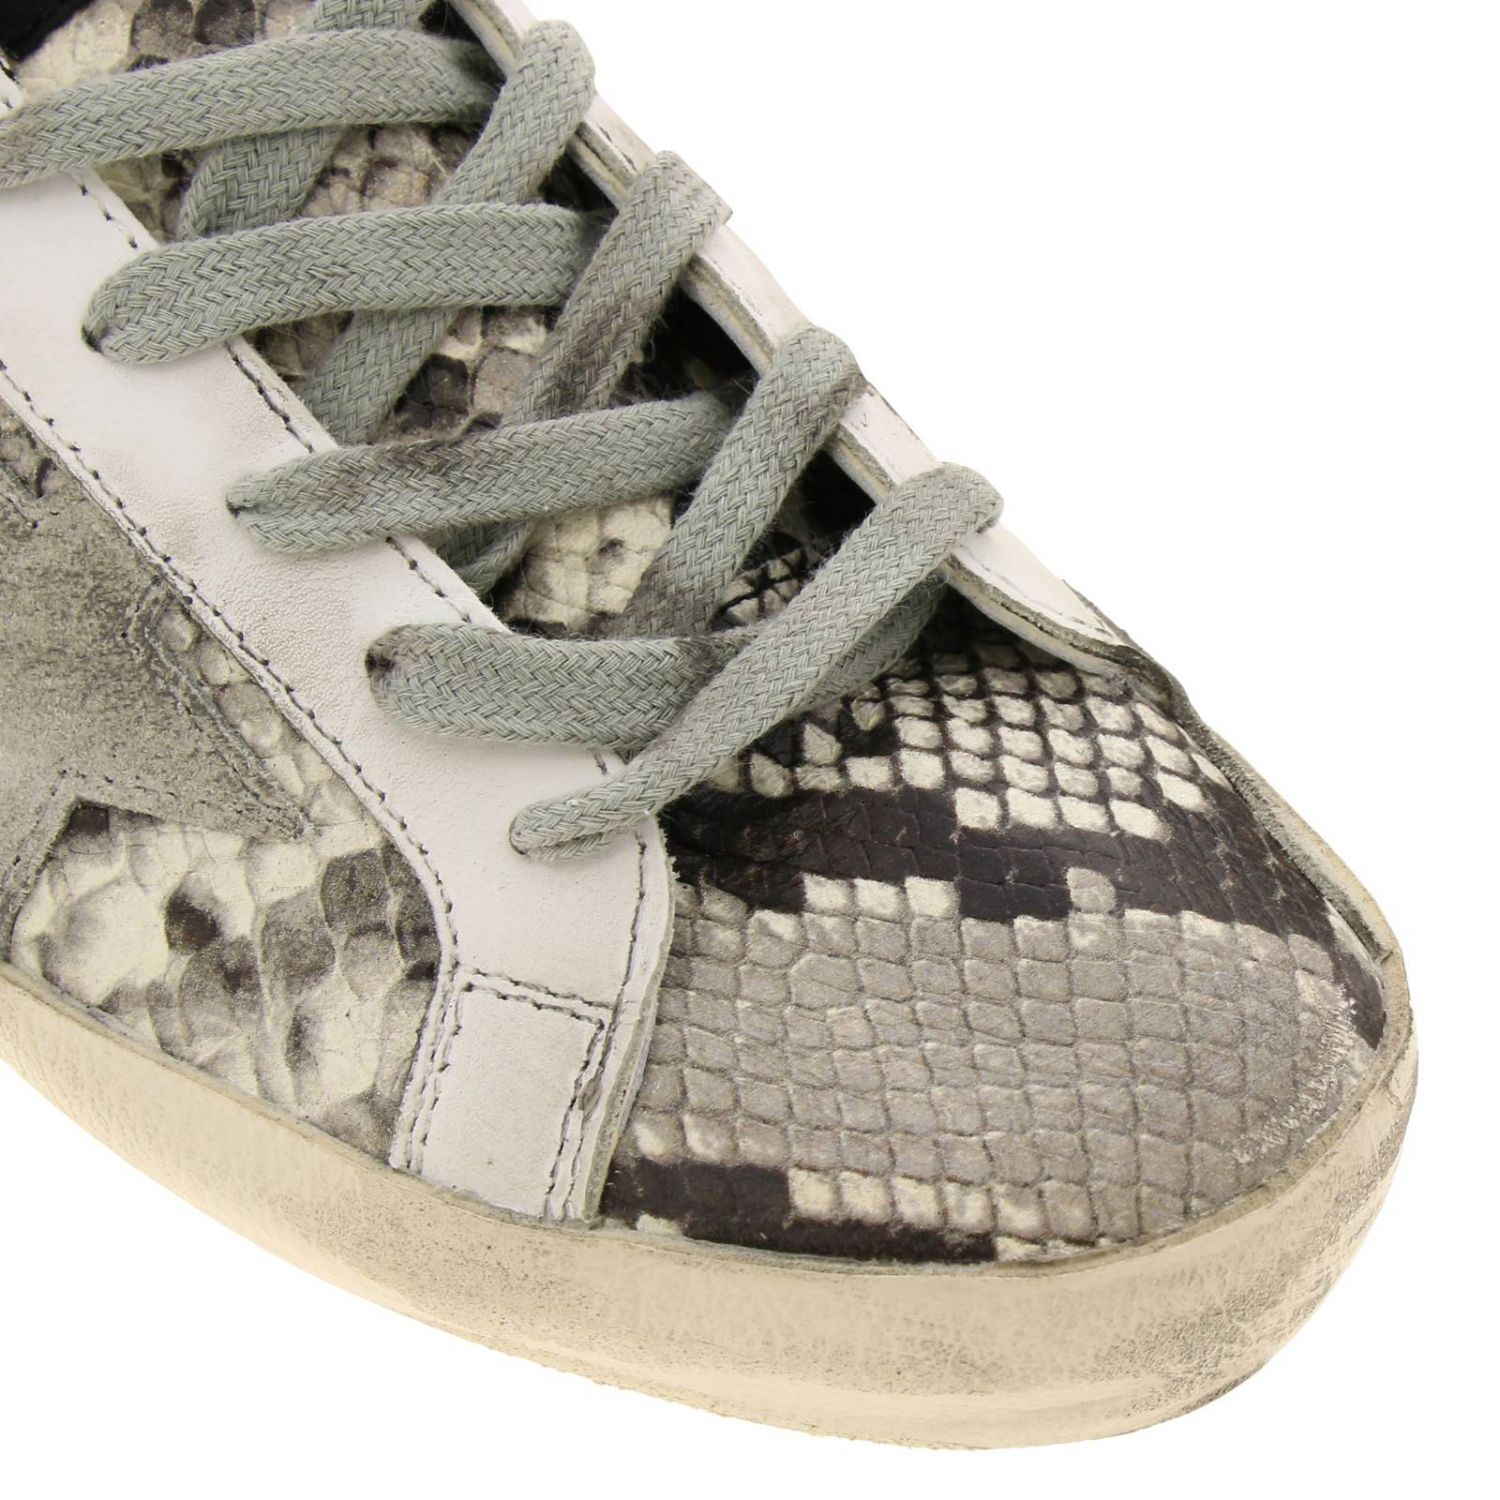 superstar sneakers in snakeskin print leather and suede